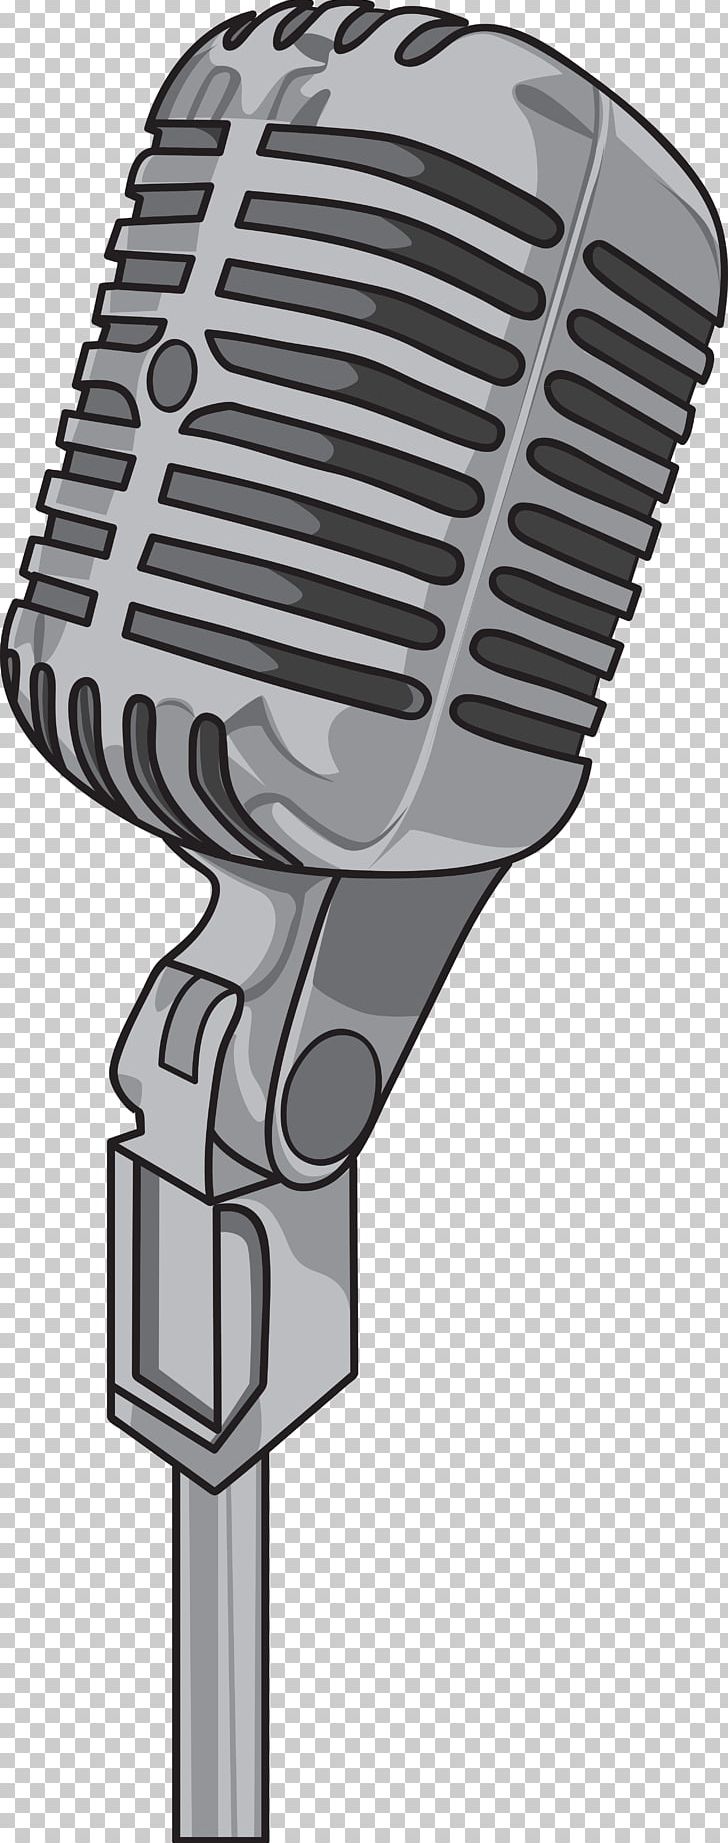 Microphone Sound Recording And Reproduction Podcast Audio PNG, Clipart, Angle, Audio, Audio Equipment, Broadcasting, Electronics Free PNG Download